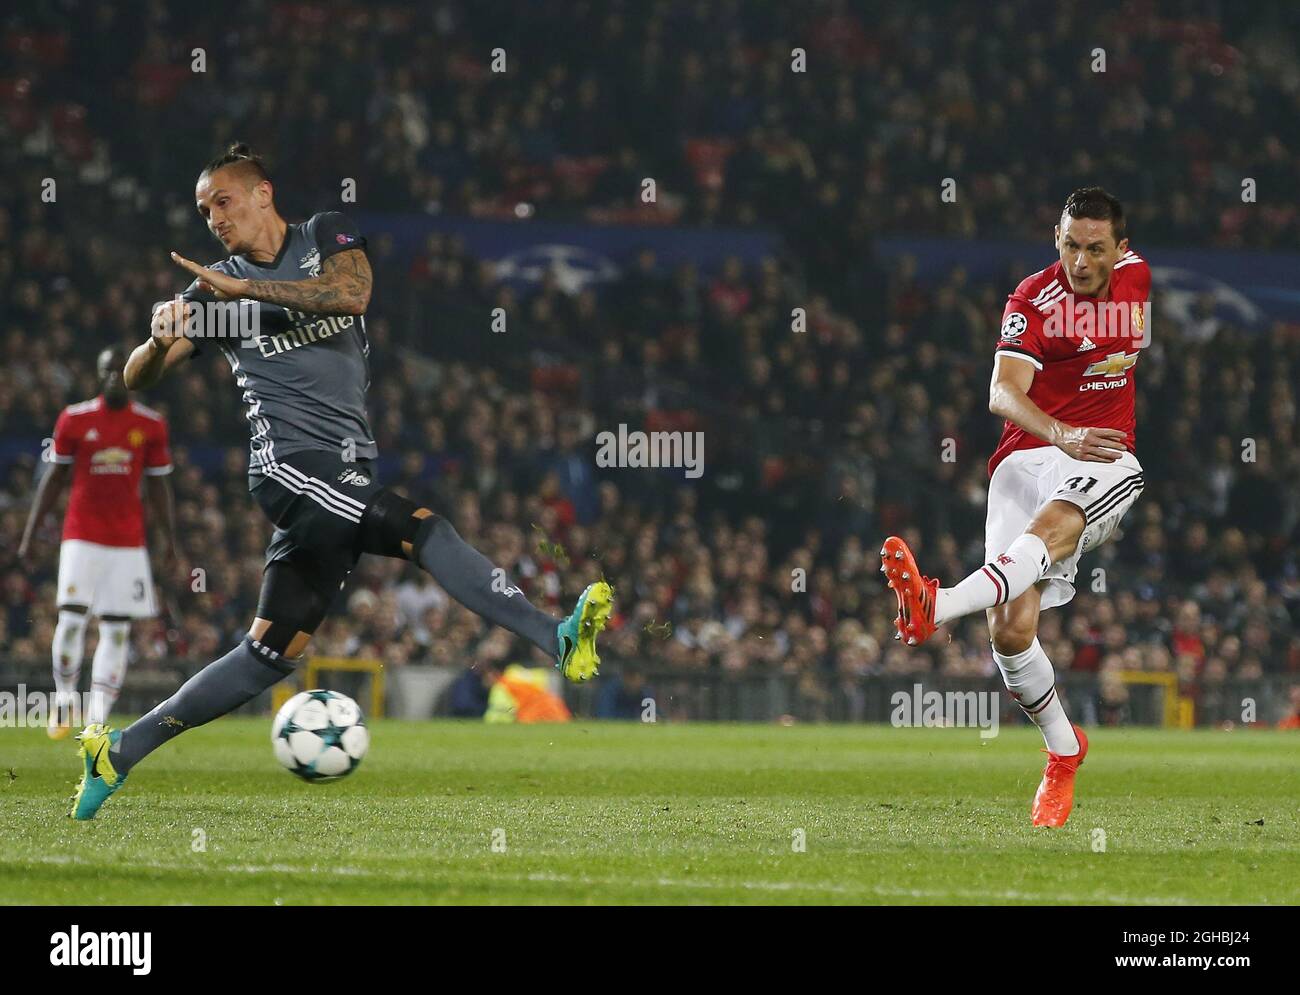 Nemanja Matic of Manchester United takes a shot and hits the post and then bounces off the goal keeper to score during the Champions League Group A match at the Old Trafford Stadium, Manchester. Picture date: October 31st 2017. Picture credit should read: Andrew Yates/Sportimage via PA Images Stock Photo